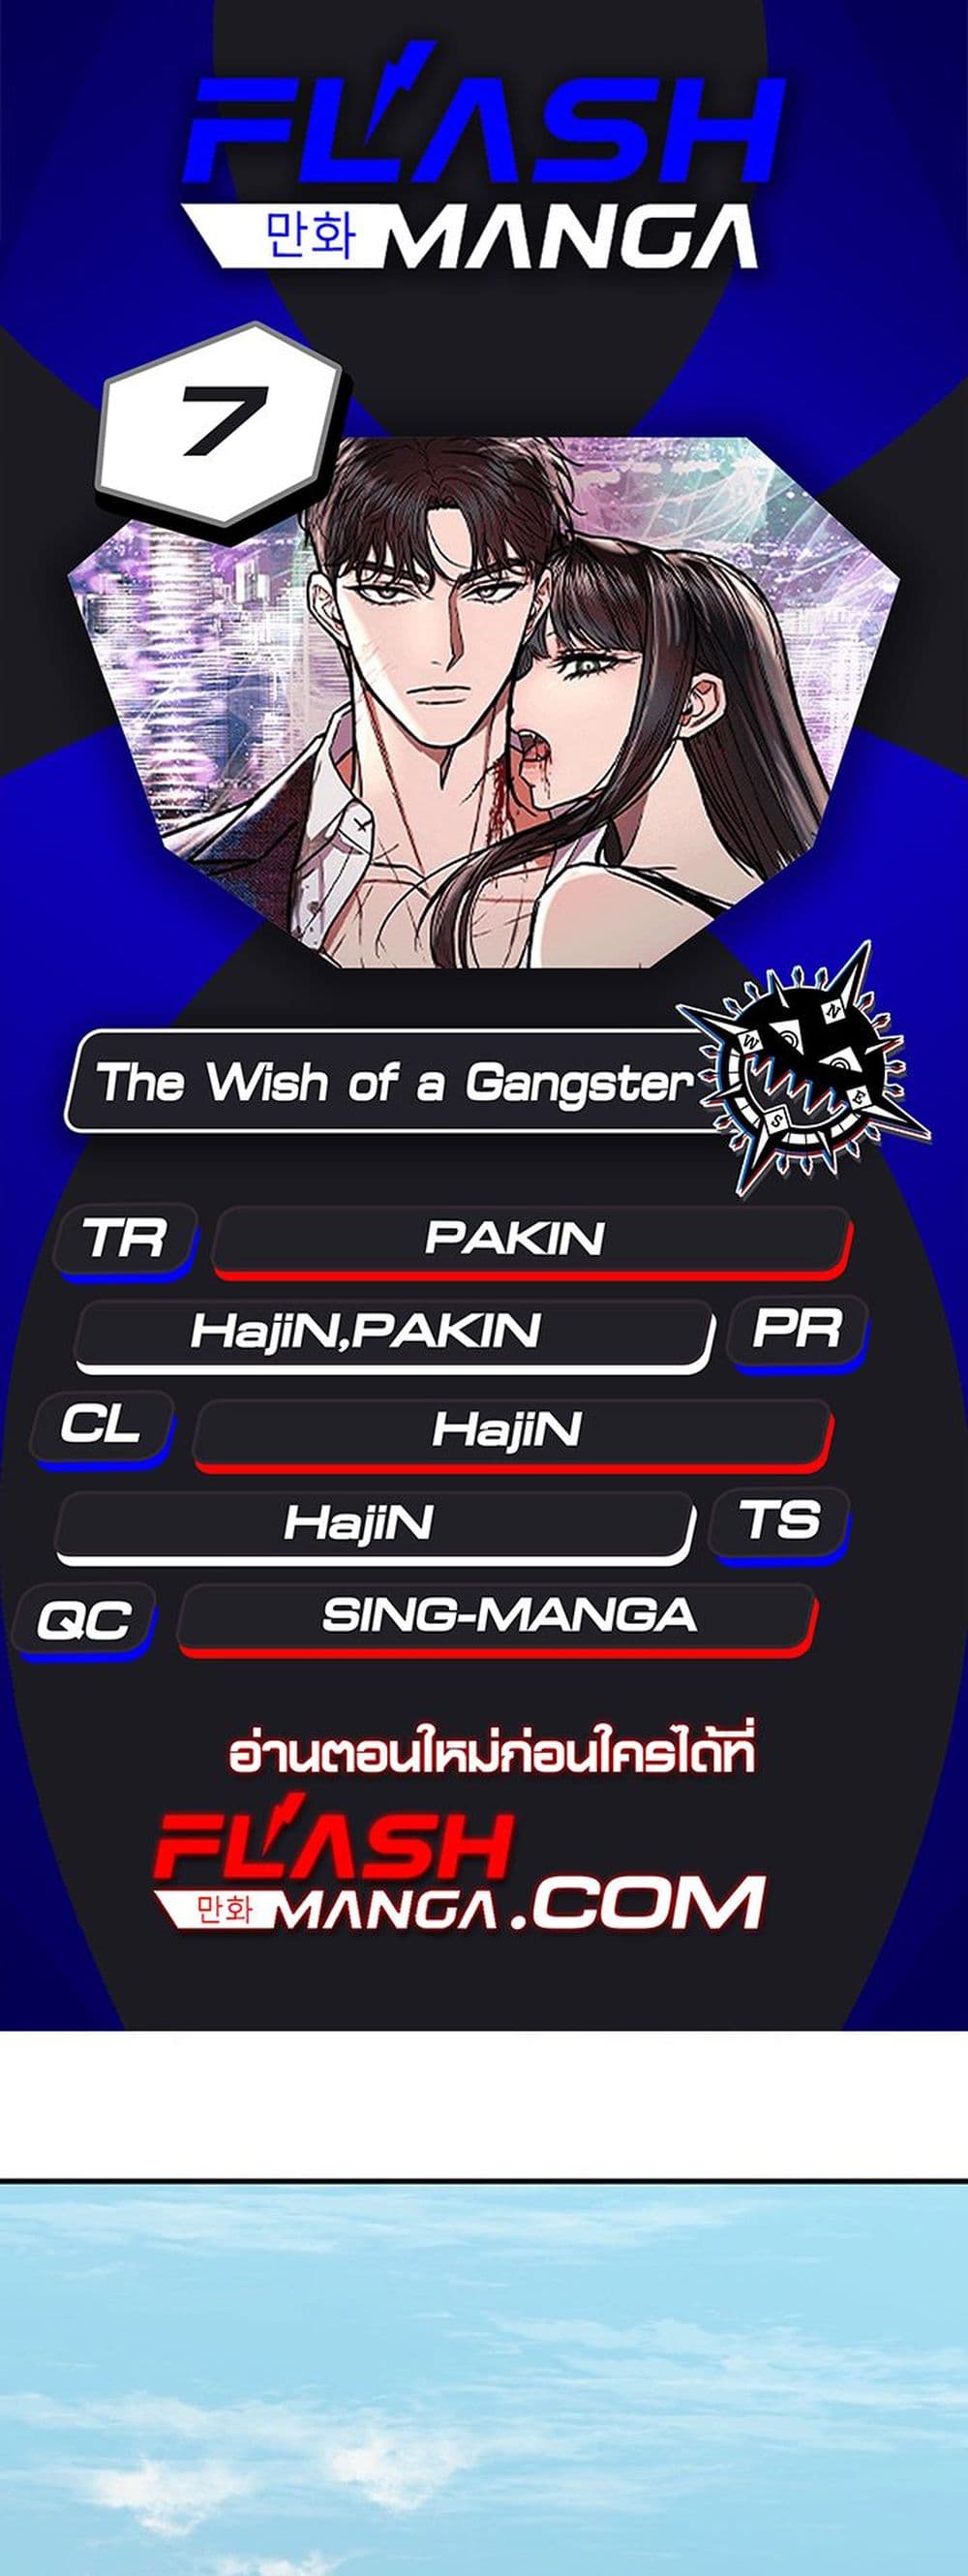 The Wish of a Gangster 7 01